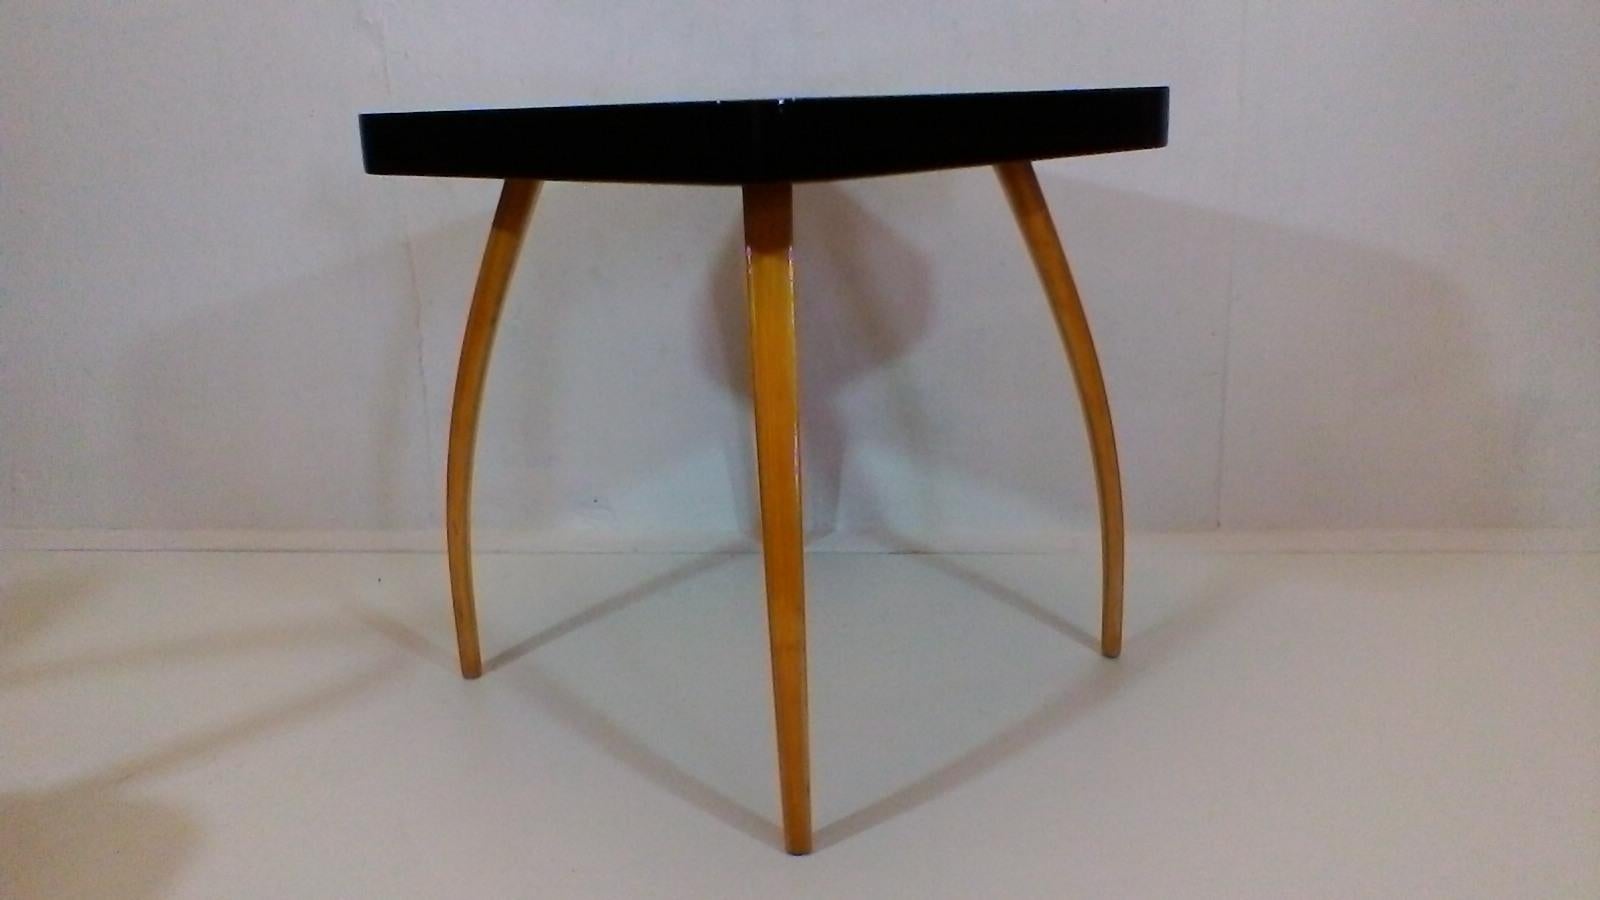 Czech Midcentury Coffee Table 'Spider' Design by Jindřich Halabal, 1930